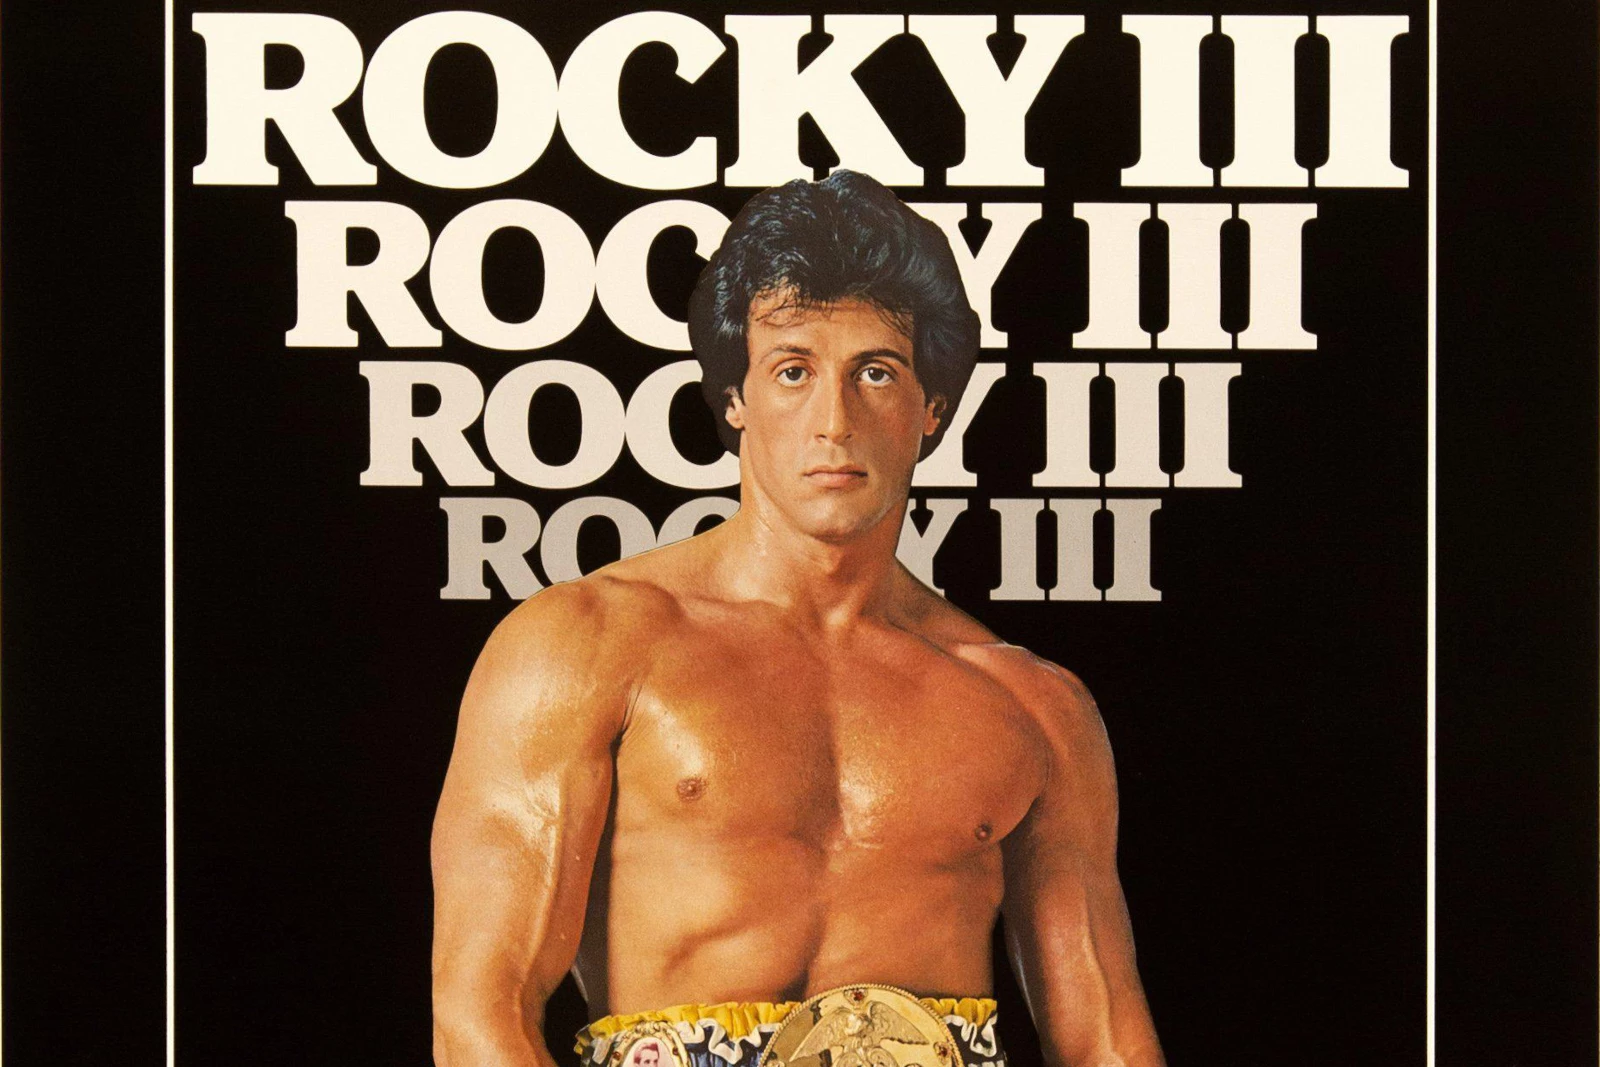 How 'Rocky IV' Became the Franchise's Greatest Guilty Pleasure